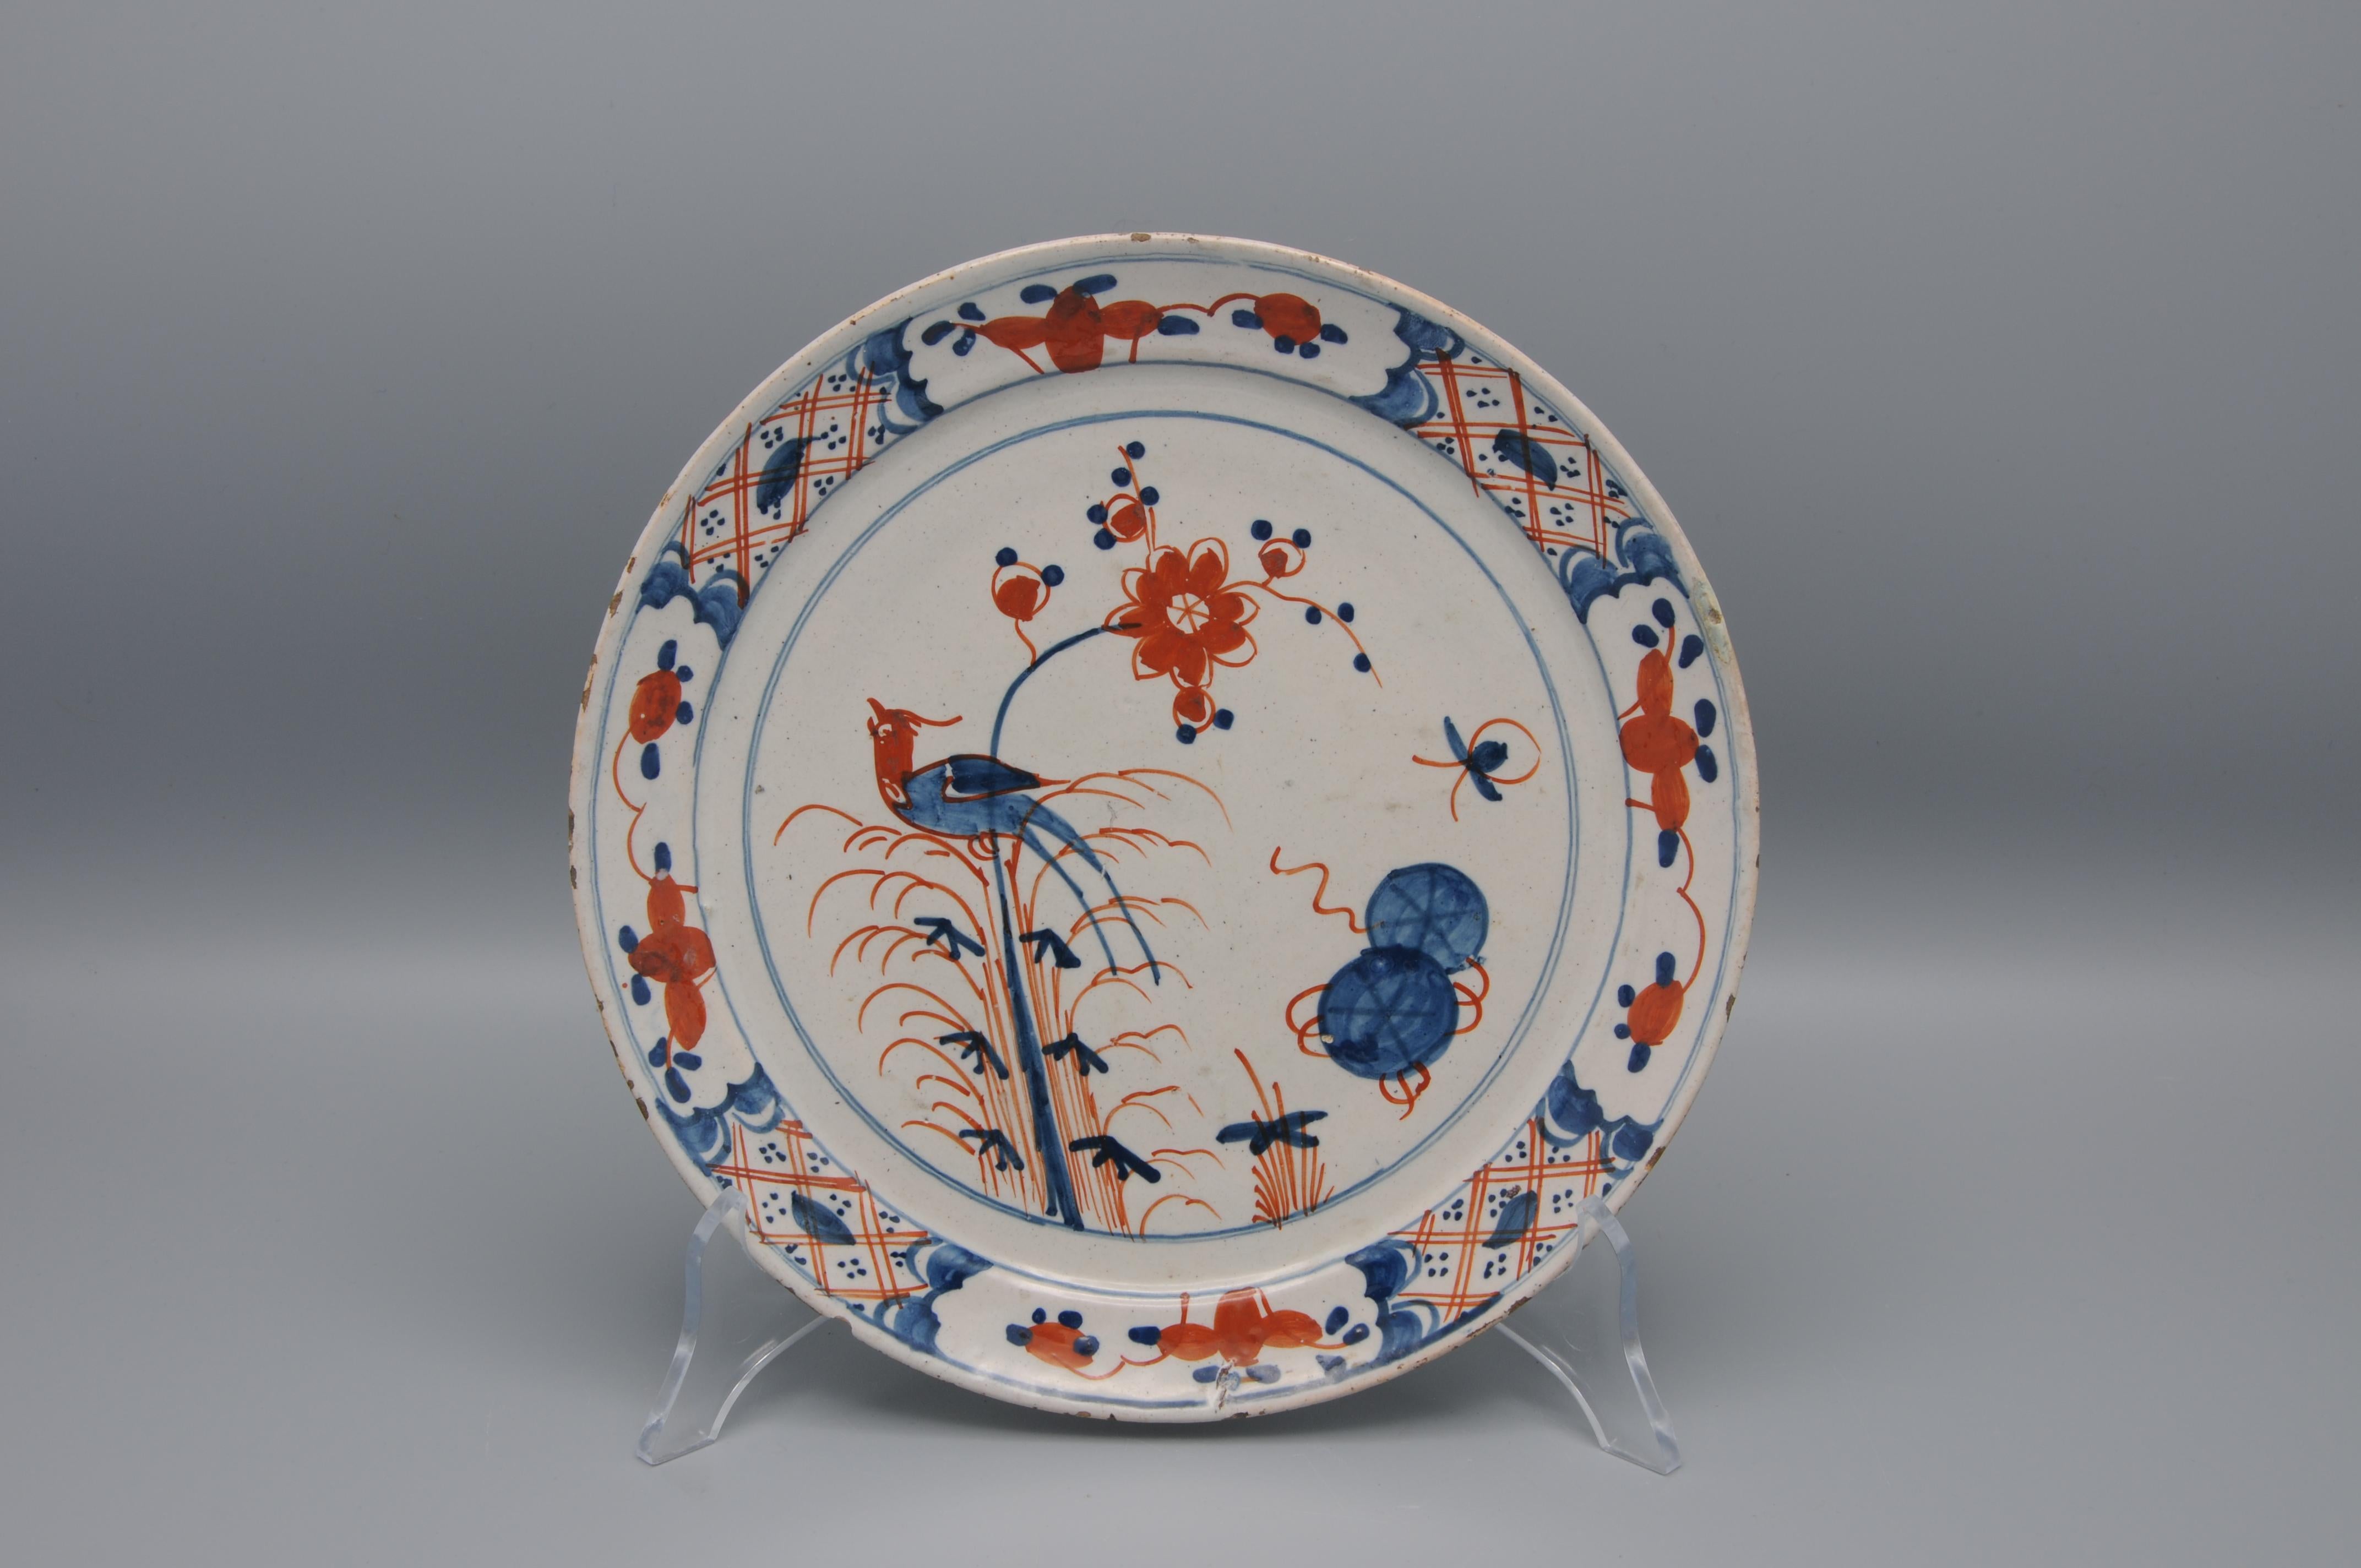 Glazed Delft  - 18th century Polychrome Chinoiserie Plate For Sale